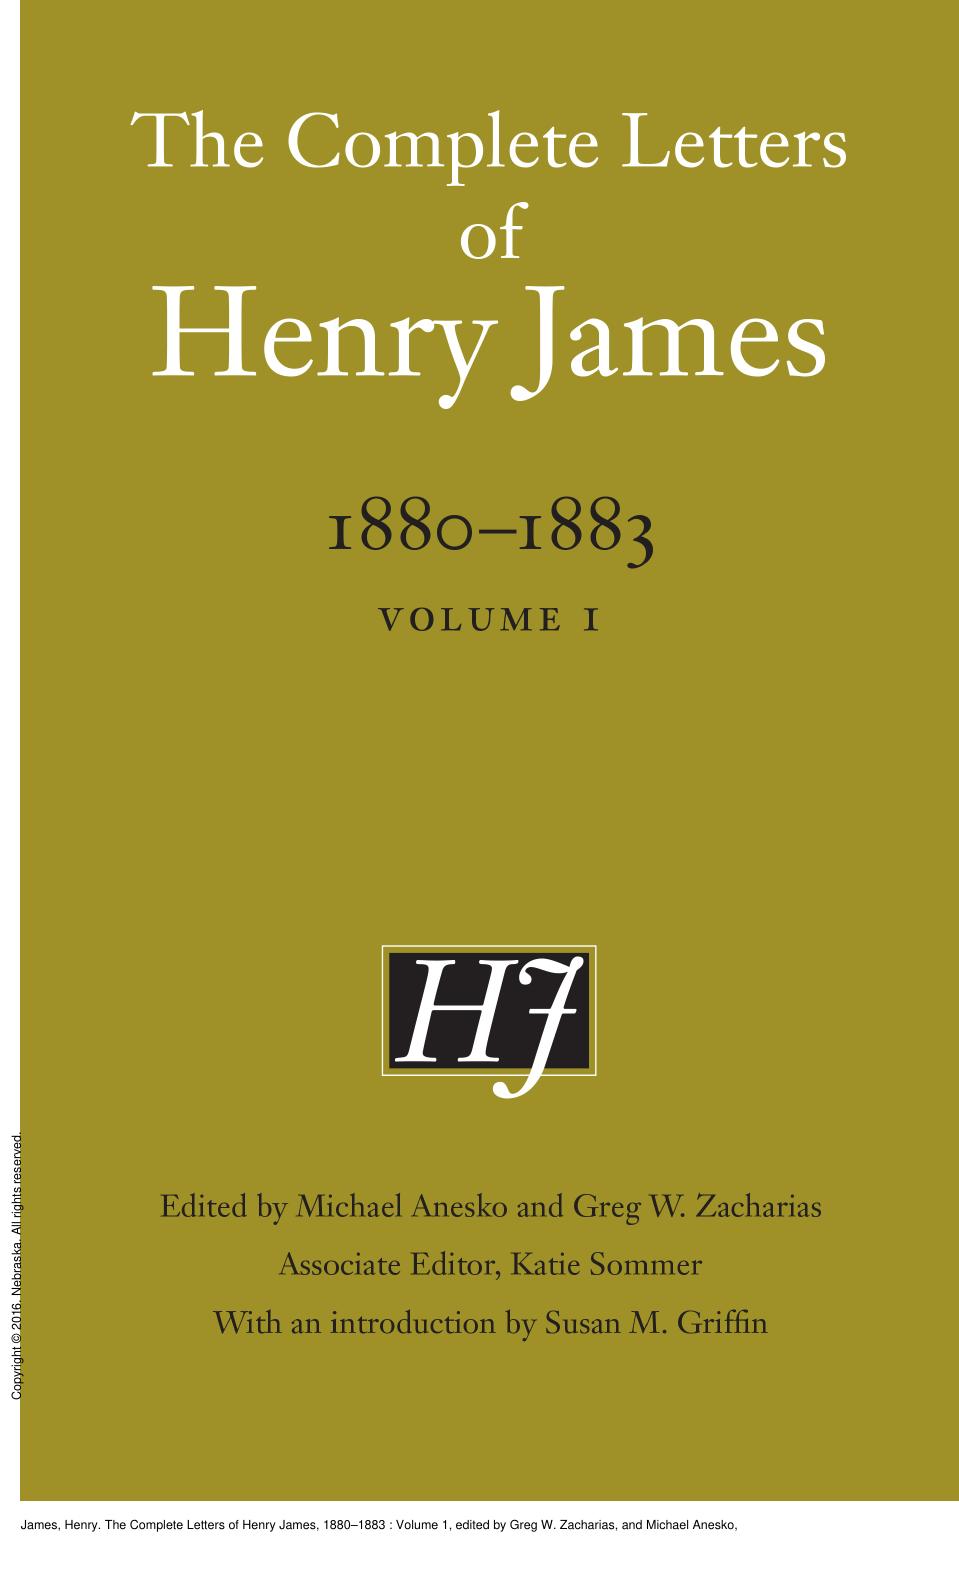 The Complete Letters of Henry James, 1880â1883 : Volume 1 by Henry James; Greg W. Zacharias; Michael Anesko; Susan M Griffin